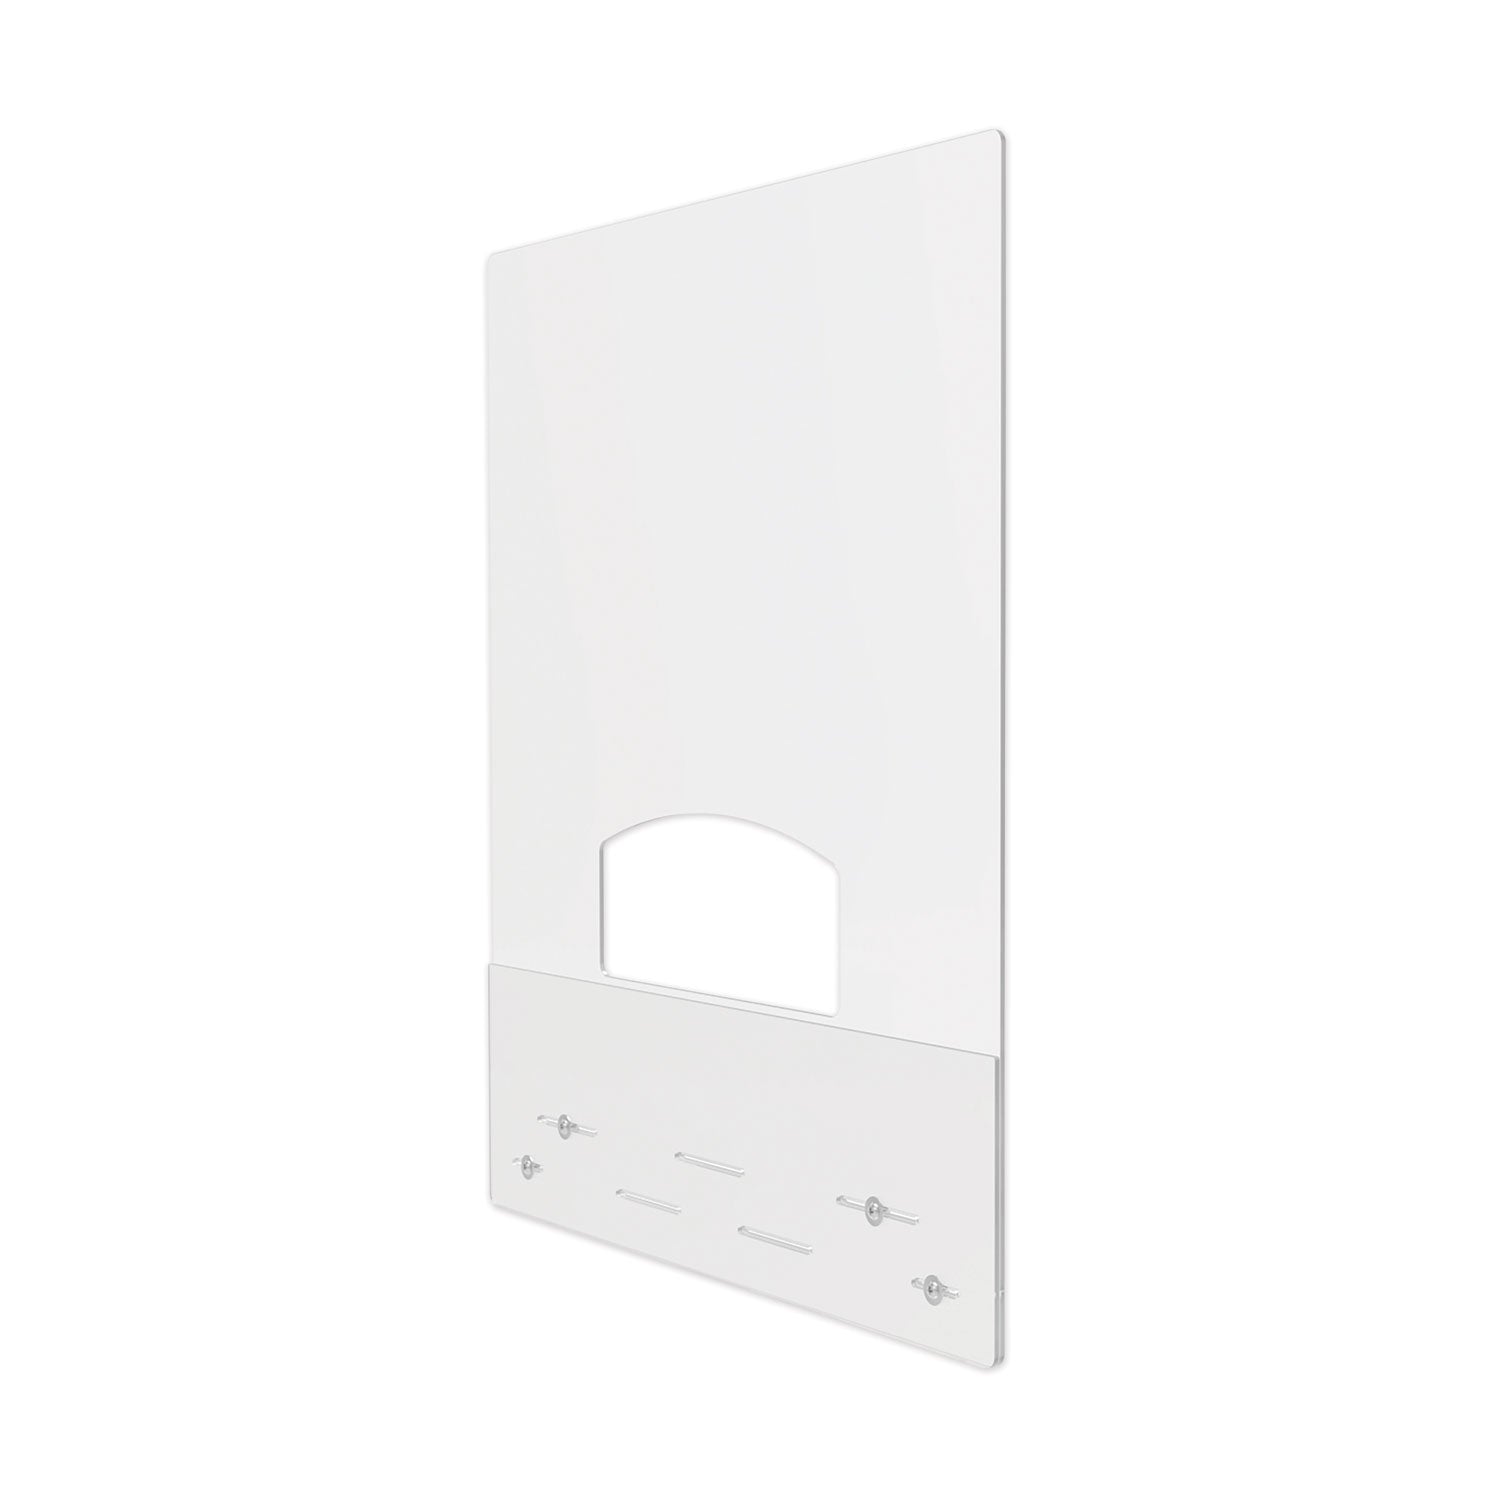 mounting-safety-barrier-with-pass-thru-315-x-38-polycarbonate-clear-2-carton_defpbcmpc3138p - 1